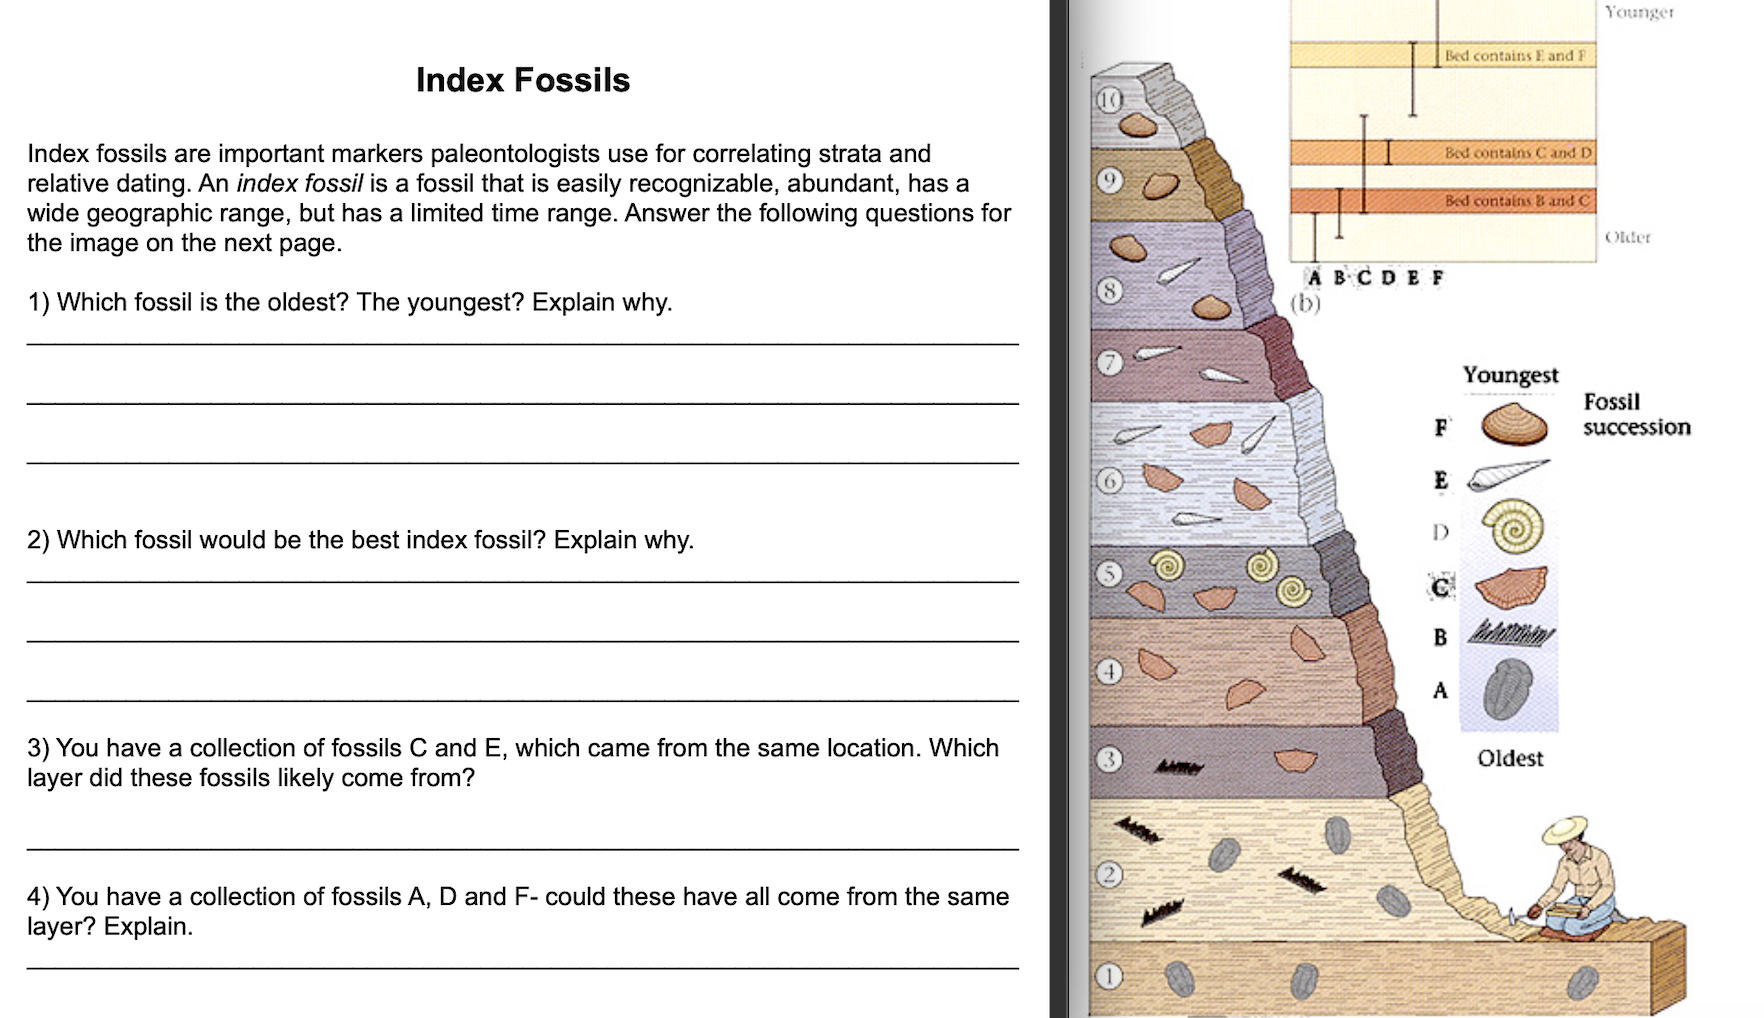 Are fossils the index best What characteristics